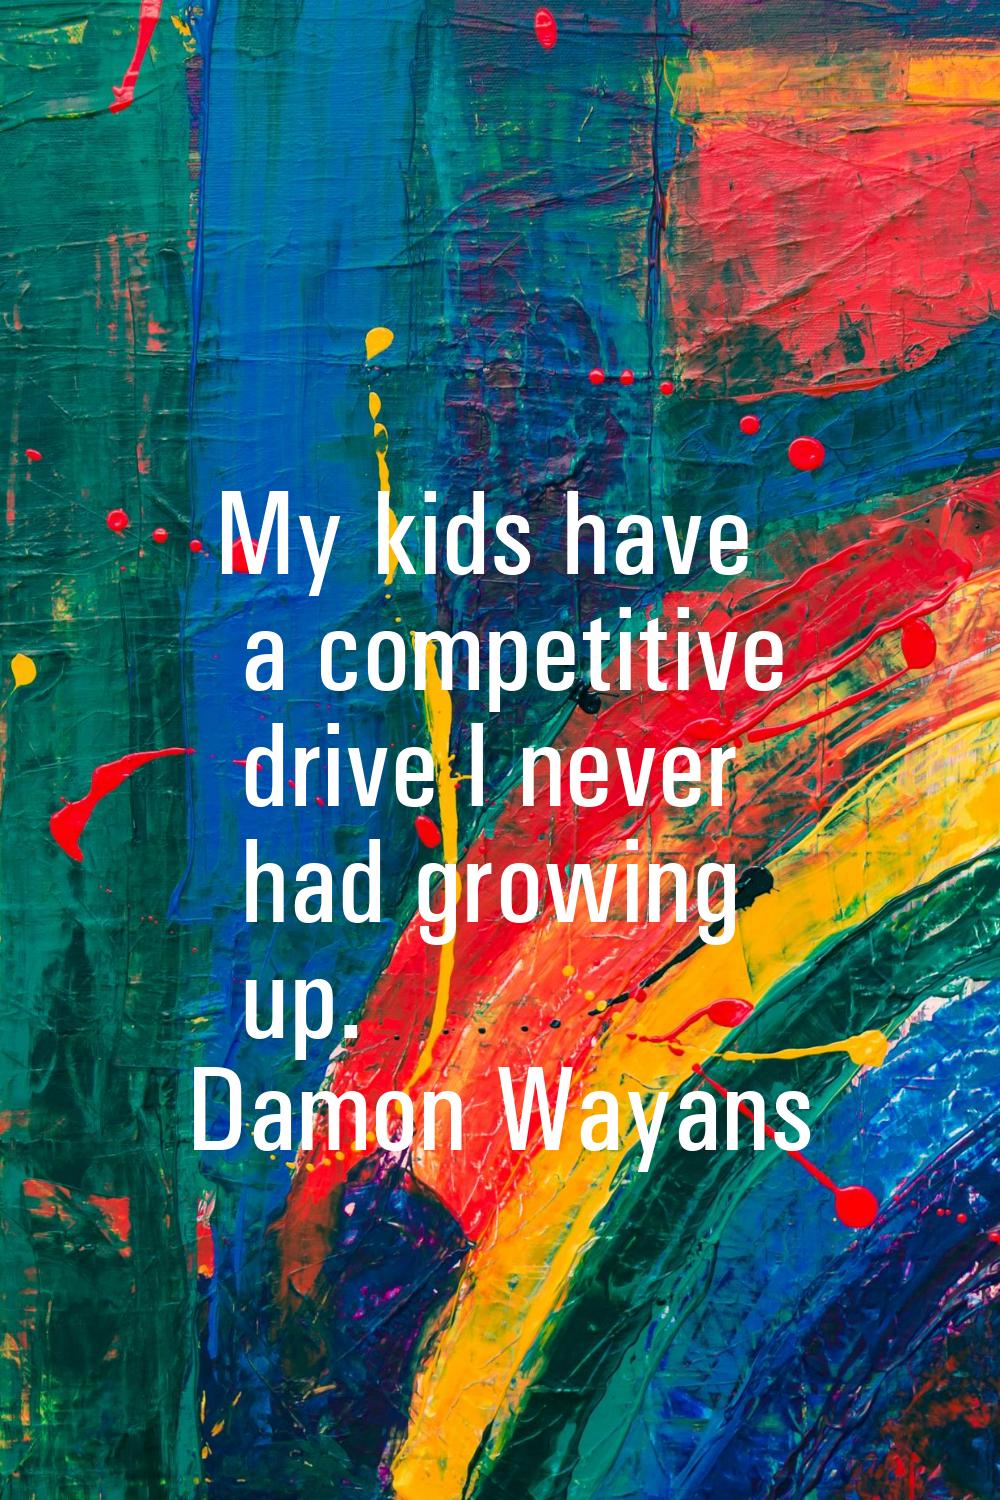 My kids have a competitive drive I never had growing up.